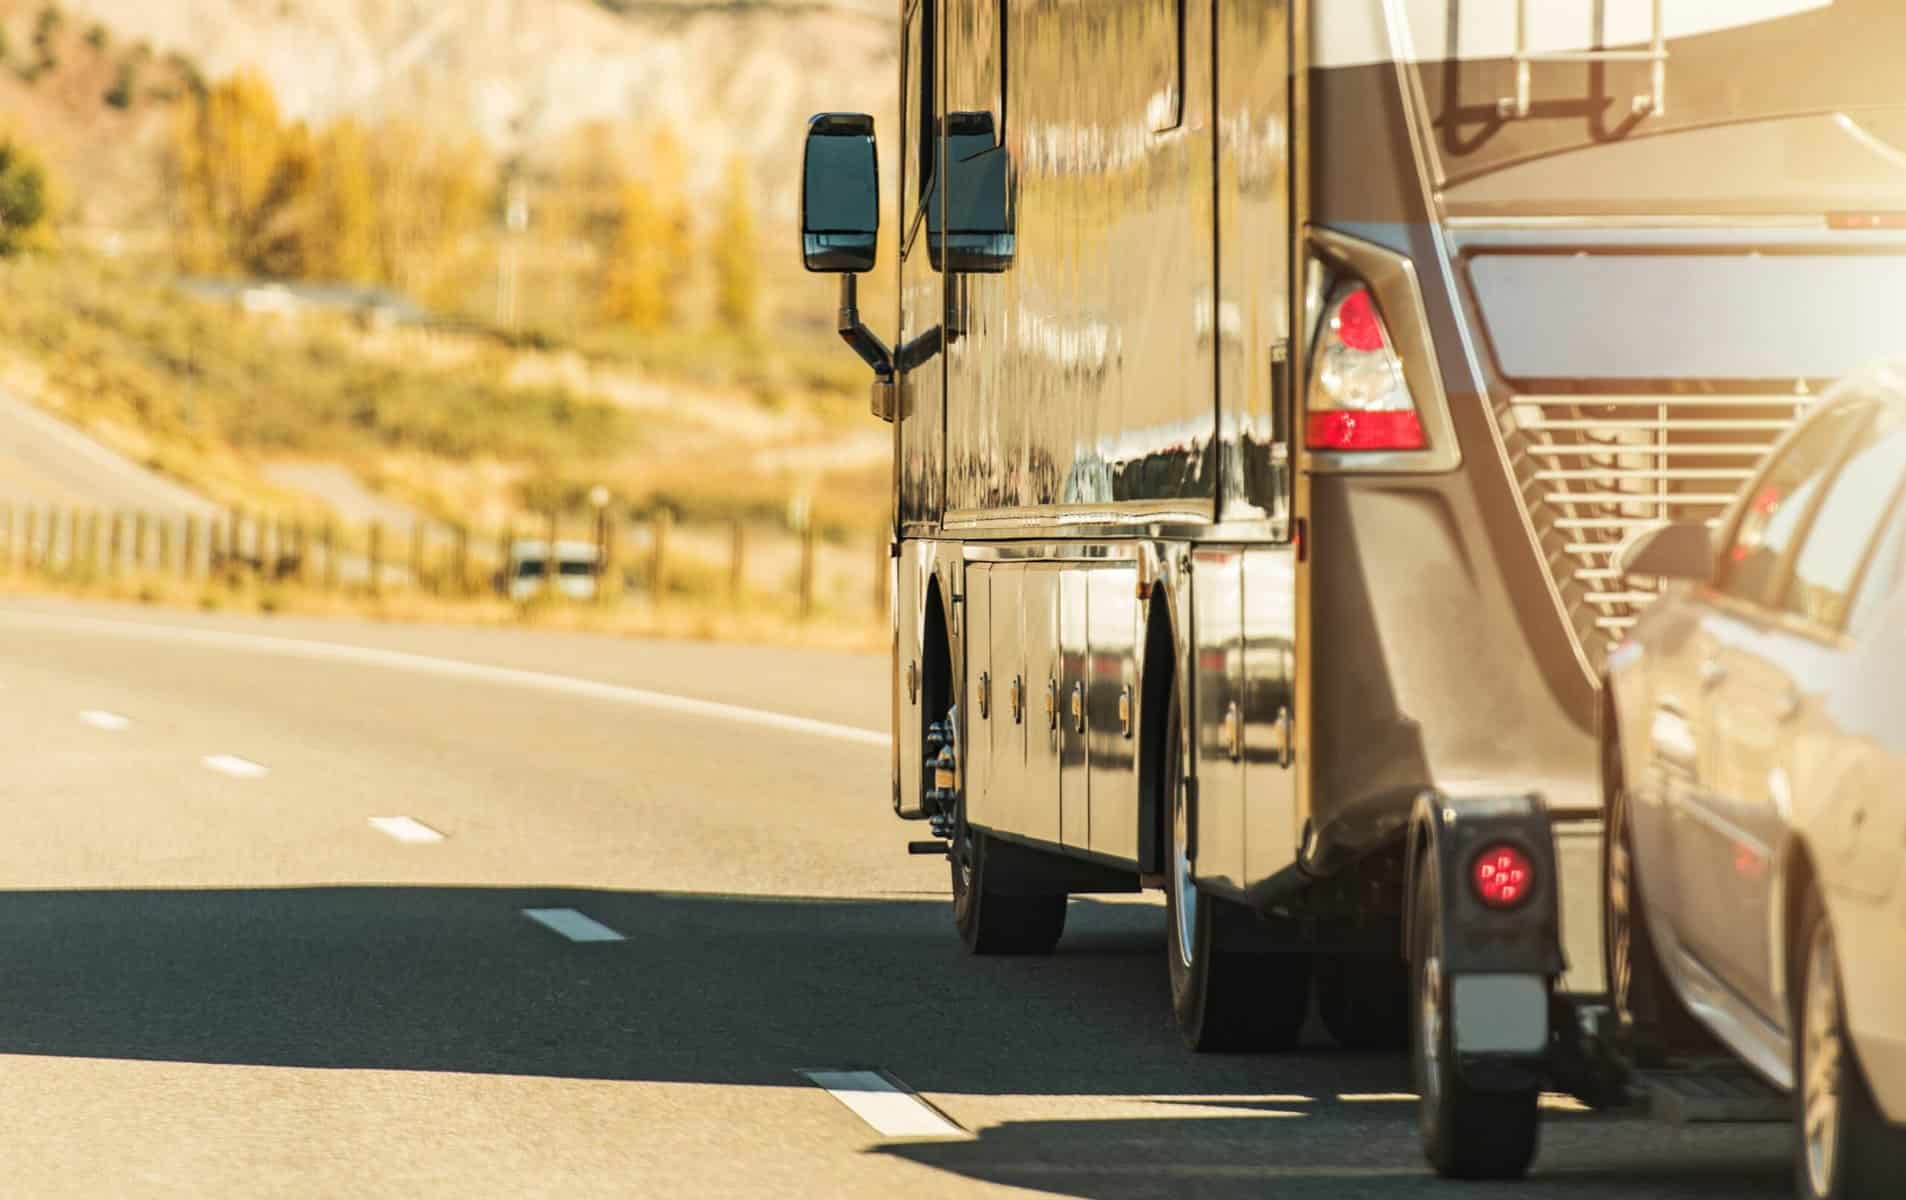 diesel pusher RV on the road (Image: Shutterstock)